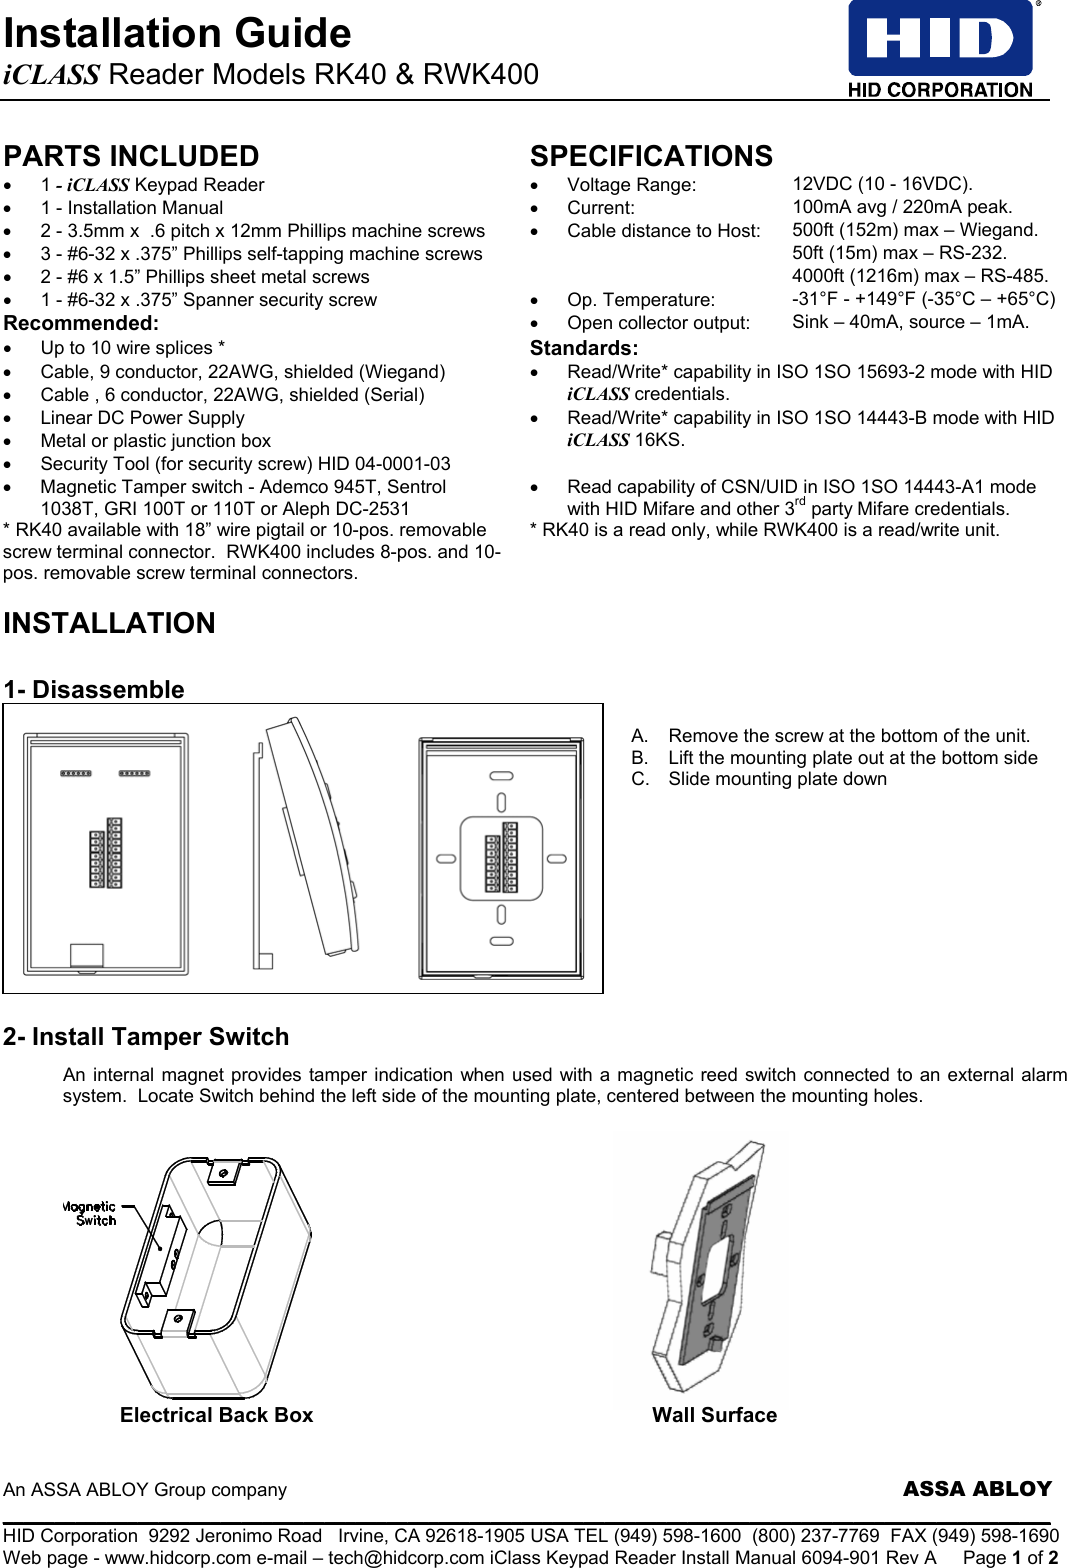 Installation Guide   iCLASS Reader Models RK40 &amp; RWK400                An ASSA ABLOY Group company                     ASSA ABLOY _____________________________________________________________________________________________________ HID Corporation  9292 Jeronimo Road   Irvine, CA 92618-1905 USA TEL (949) 598-1600  (800) 237-7769  FAX (949) 598-1690 Web page - www.hidcorp.com e-mail – tech@hidcorp.com iClass Keypad Reader Install Manual 6094-901 Rev A  Page 1 of 2 PARTS INCLUDED SPECIFICATIONS • 1 - iCLASS Keypad Reader  •  Voltage Range:                  12VDC (10 - 16VDC). •  1 - Installation Manual  •  Current:                             100mA avg / 220mA peak. •  2 - 3.5mm x  .6 pitch x 12mm Phillips machine screws  •  Cable distance to Host:     500ft (152m) max – Wiegand. •  3 - #6-32 x .375” Phillips self-tapping machine screws     50ft (15m) max – RS-232. •  2 - #6 x 1.5” Phillips sheet metal screws     4000ft (1216m) max – RS-485. •  1 - #6-32 x .375” Spanner security screw   •  Op. Temperature:            -31°F - +149°F (-35°C – +65°C) Recommended: •  Open collector output:  Sink – 40mA, source – 1mA. •  Up to 10 wire splices *  Standards:  •  Cable, 9 conductor, 22AWG, shielded (Wiegand) •  Cable , 6 conductor, 22AWG, shielded (Serial) •  Read/Write* capability in ISO 1SO 15693-2 mode with HID iCLASS credentials. •  Linear DC Power Supply •  Metal or plastic junction box •  Security Tool (for security screw) HID 04-0001-03 •  Read/Write* capability in ISO 1SO 14443-B mode with HID iCLASS 16KS. •  Magnetic Tamper switch - Ademco 945T, Sentrol 1038T, GRI 100T or 110T or Aleph DC-2531 •  Read capability of CSN/UID in ISO 1SO 14443-A1 mode with HID Mifare and other 3rd party Mifare credentials. * RK40 available with 18” wire pigtail or 10-pos. removable screw terminal connector.  RWK400 includes 8-pos. and 10-pos. removable screw terminal connectors. * RK40 is a read only, while RWK400 is a read/write unit.  INSTALLATION   1- Disassemble  A.  Remove the screw at the bottom of the unit. B.  Lift the mounting plate out at the bottom side  C.  Slide mounting plate down           2- Install Tamper Switch An internal magnet provides tamper indication when used with a magnetic reed switch connected to an external alarm system.  Locate Switch behind the left side of the mounting plate, centered between the mounting holes.                                           Electrical Back Box  Wall Surface 